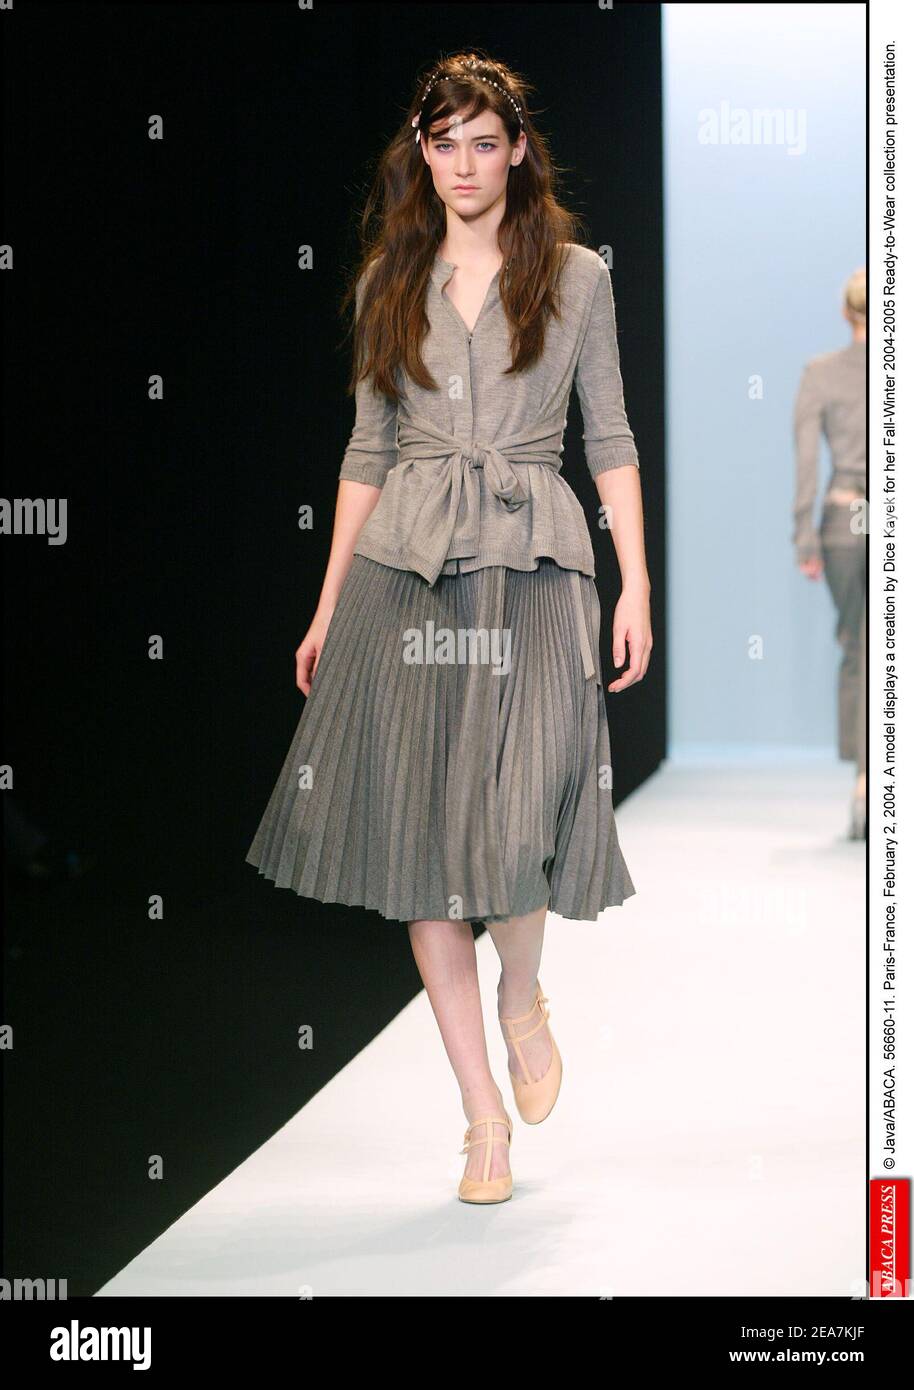 © Java/ABACA. 56660. Paris-France, March 2, 2004. A model displays a creation by Dice Kayek for her Fall-Winter 2004-2005 Ready-to-Wear collection presentation. Stock Photo